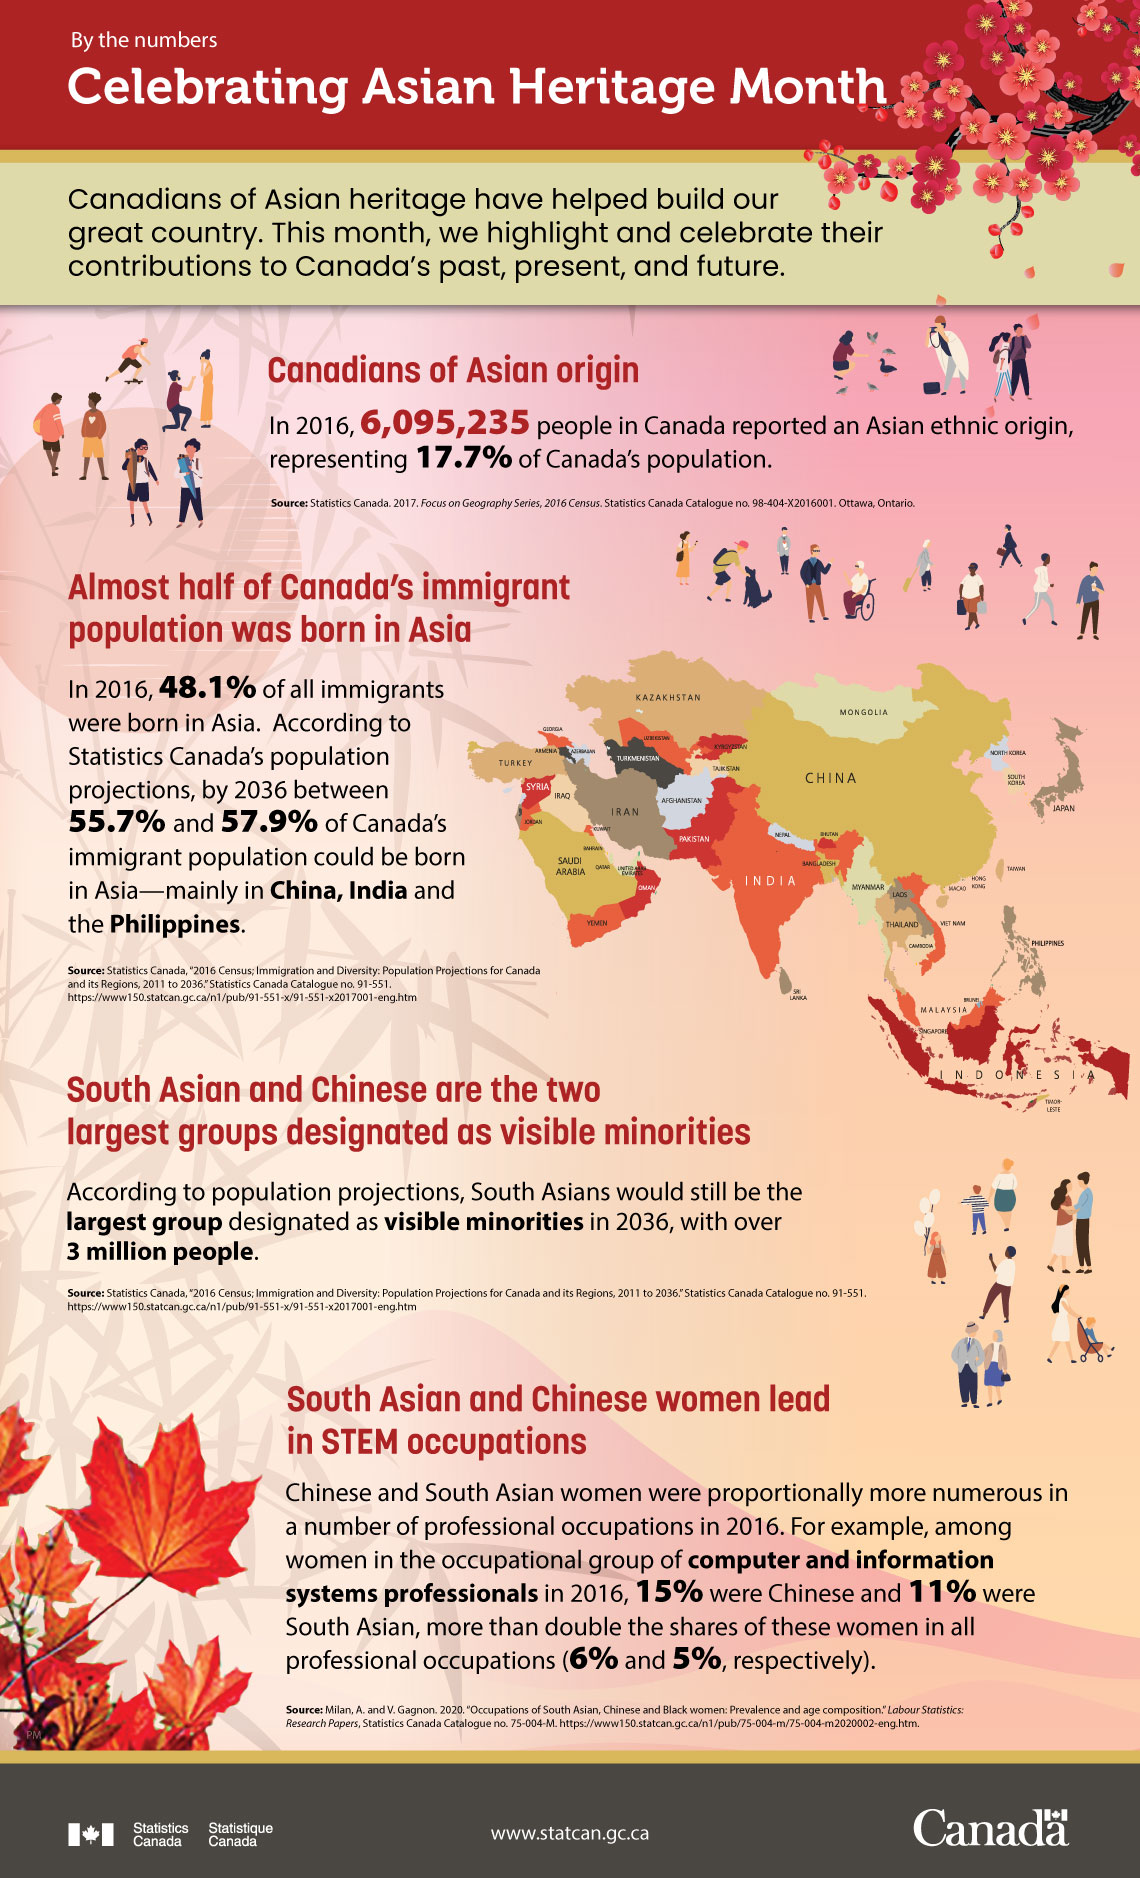 By the numbers: Celebrating Asian Heritage Month